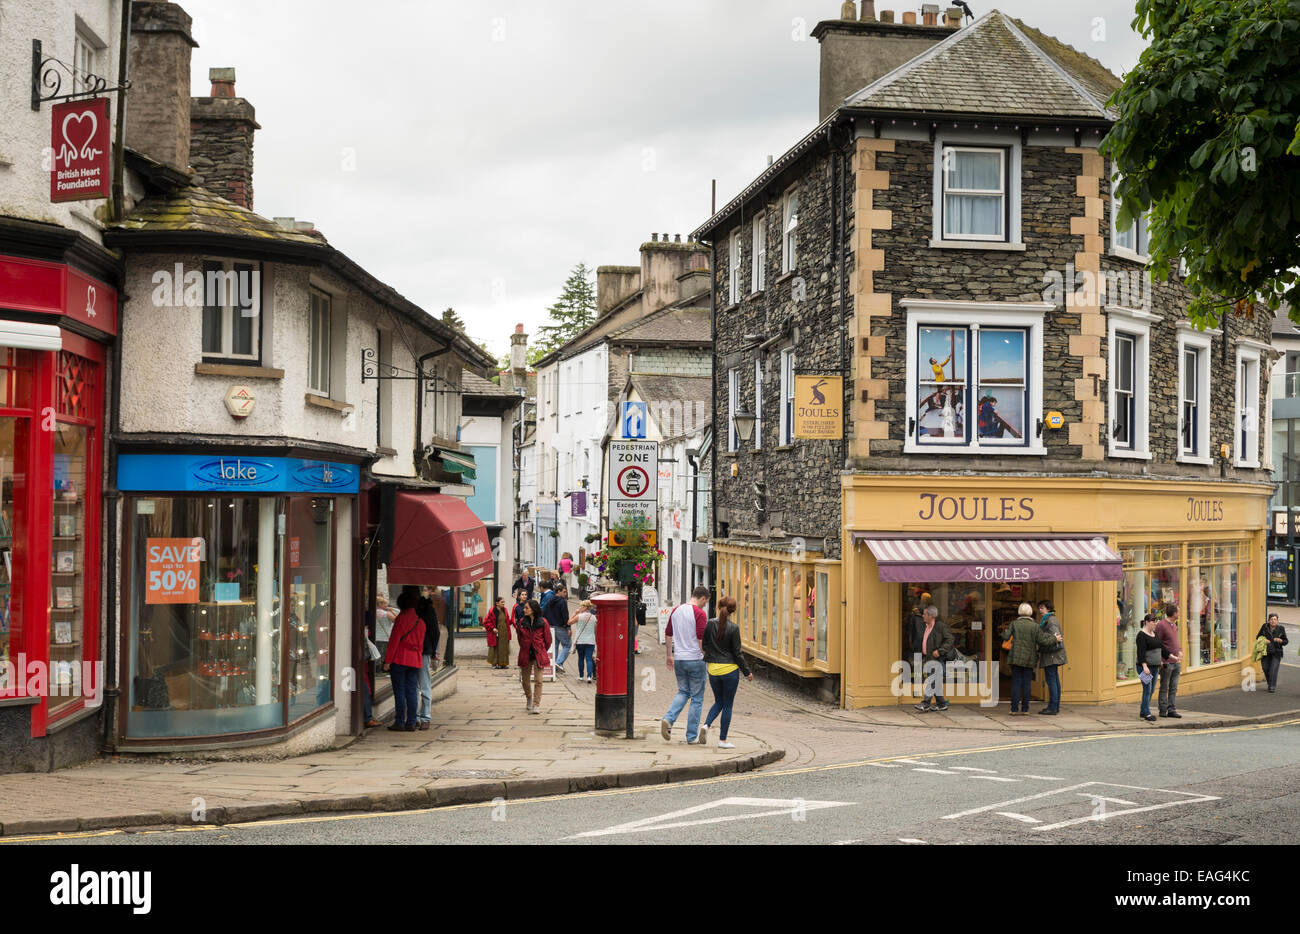 BOWNESS ON WINDERMERE, UK - JUNE 9, 2014: Tourists and locals in the small town of Bowness-on-Windermere in the Lake District, U Stock Photo